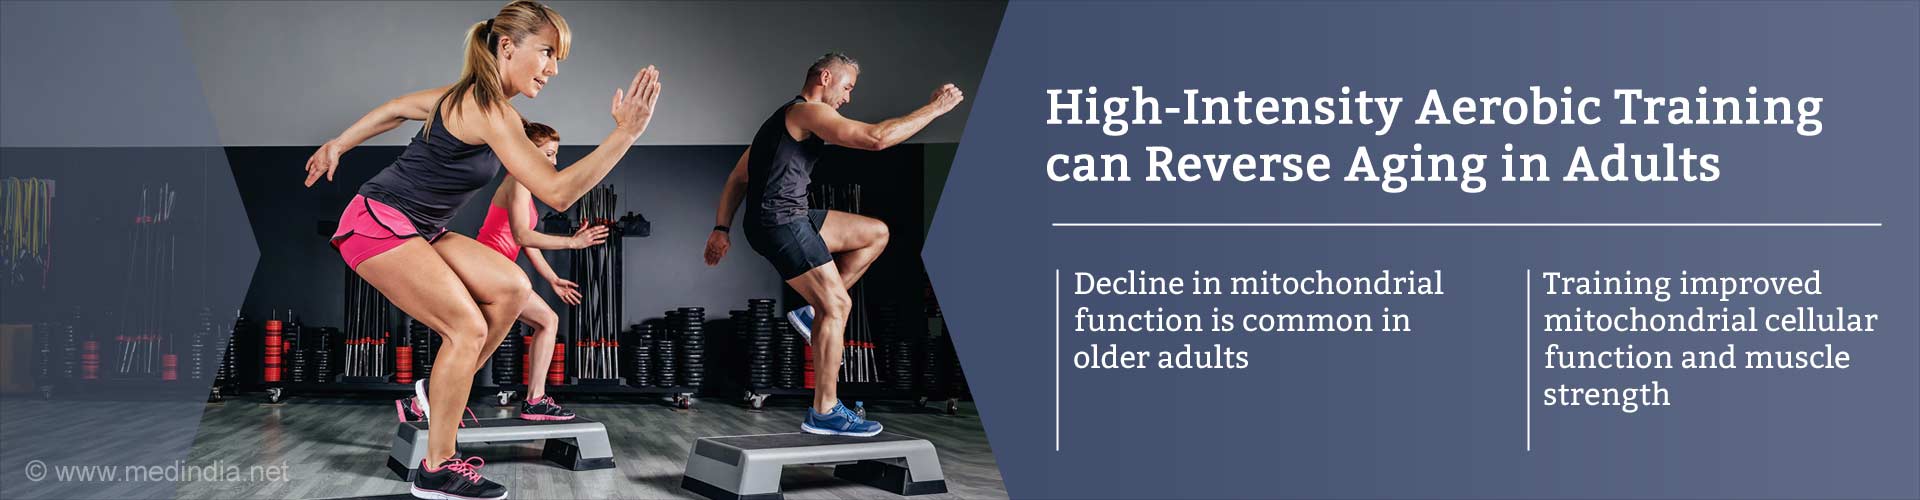 high-intensity aerobic training can reverse aging in adults
- decline in mitochondrial function is common in older adults
- training improved mitochondrial cellular mitochondrial cellular function and muscle strength
